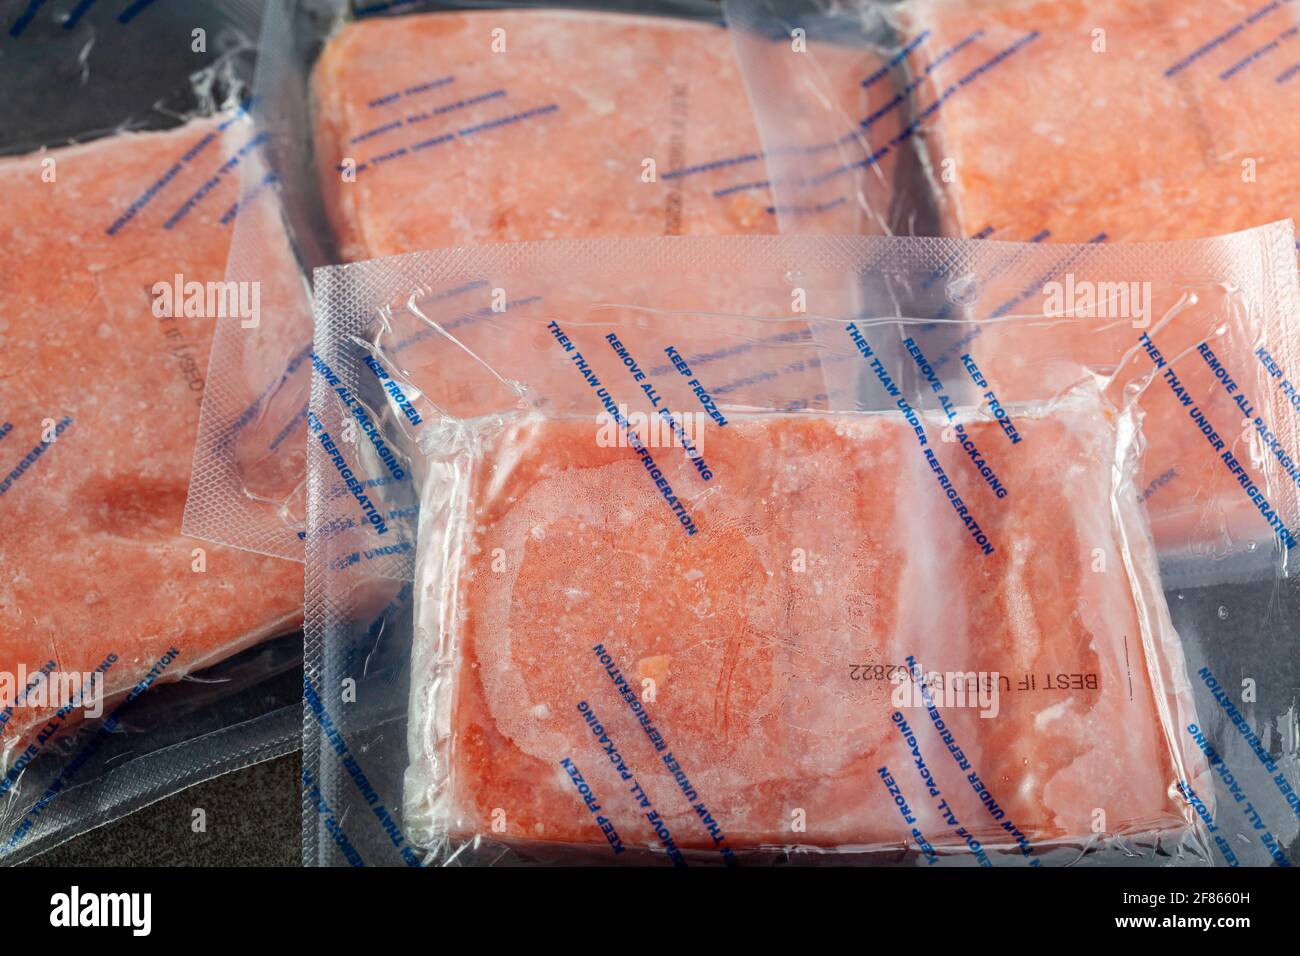 Closeup isolated image of four packs of individually packaged salmon fillets. The air tight vacuum sealed packs are frozen and the instructions say th Stock Photo